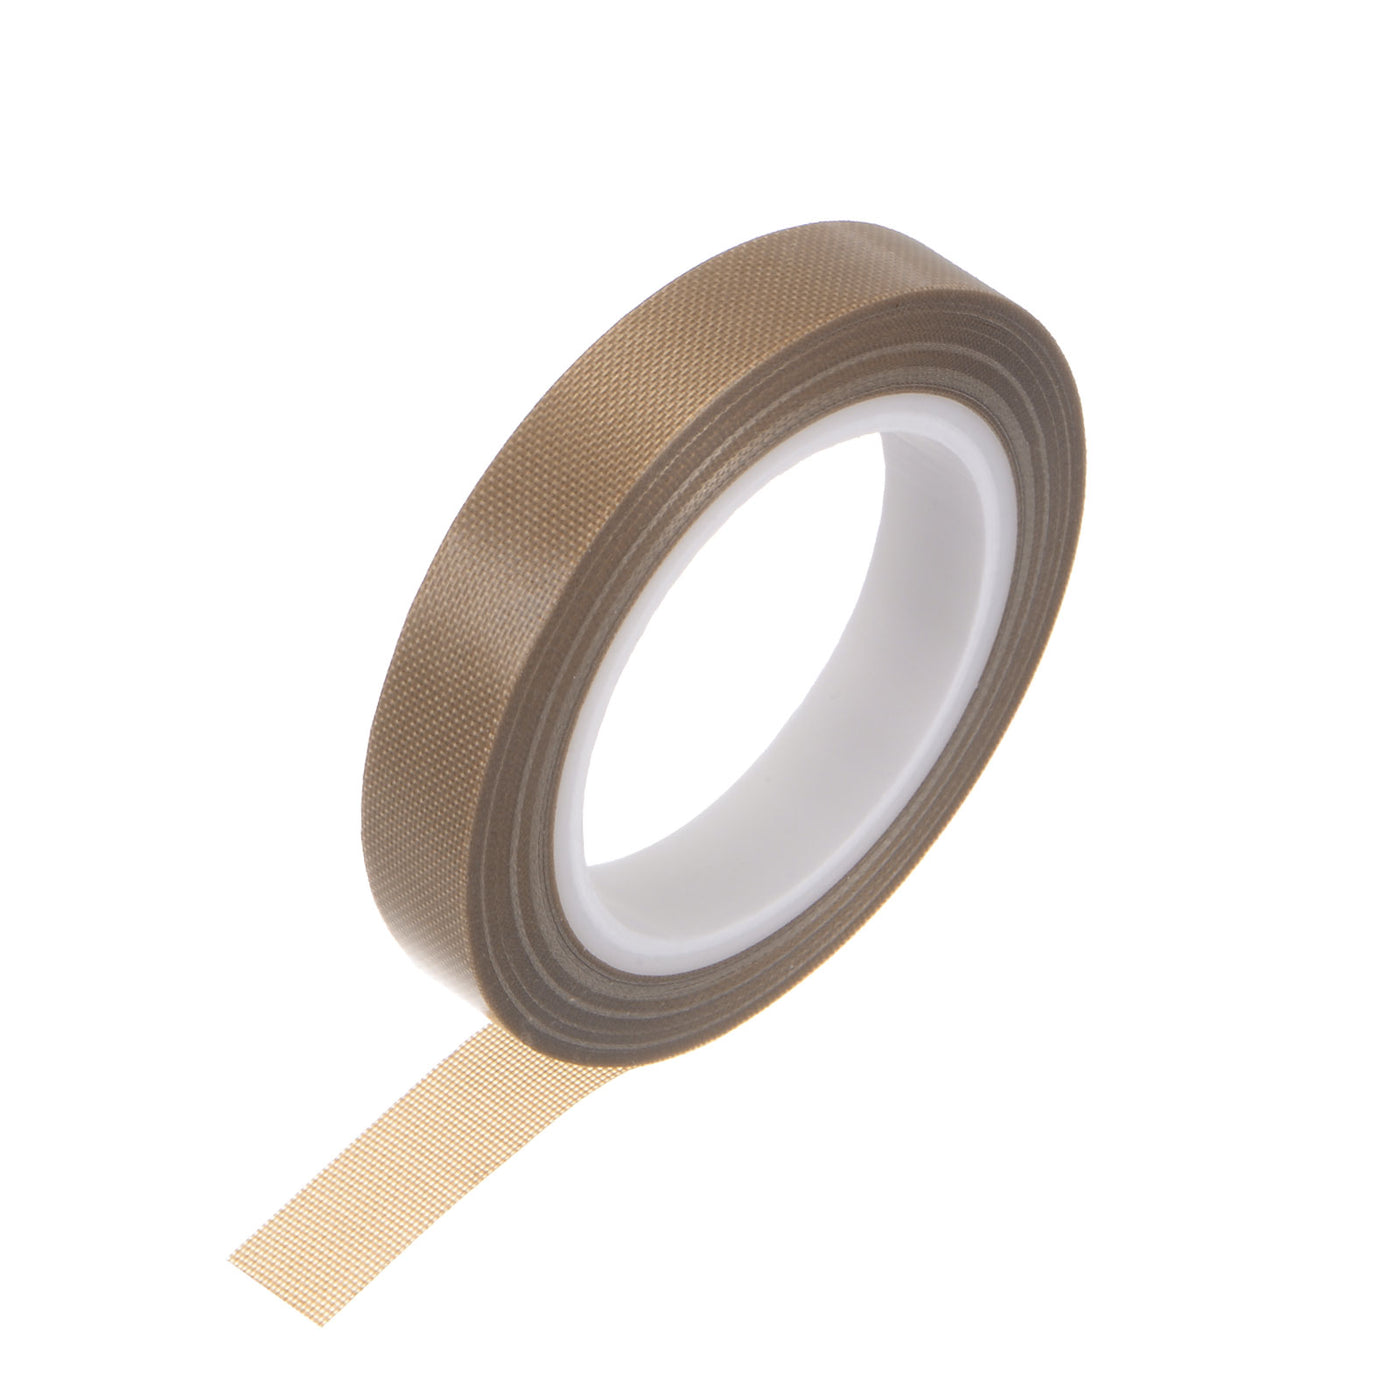 Harfington Fabric PTFE Tape 0.4"x33ft PTFE Adhesive Tape 0.13mm Thickness Brown